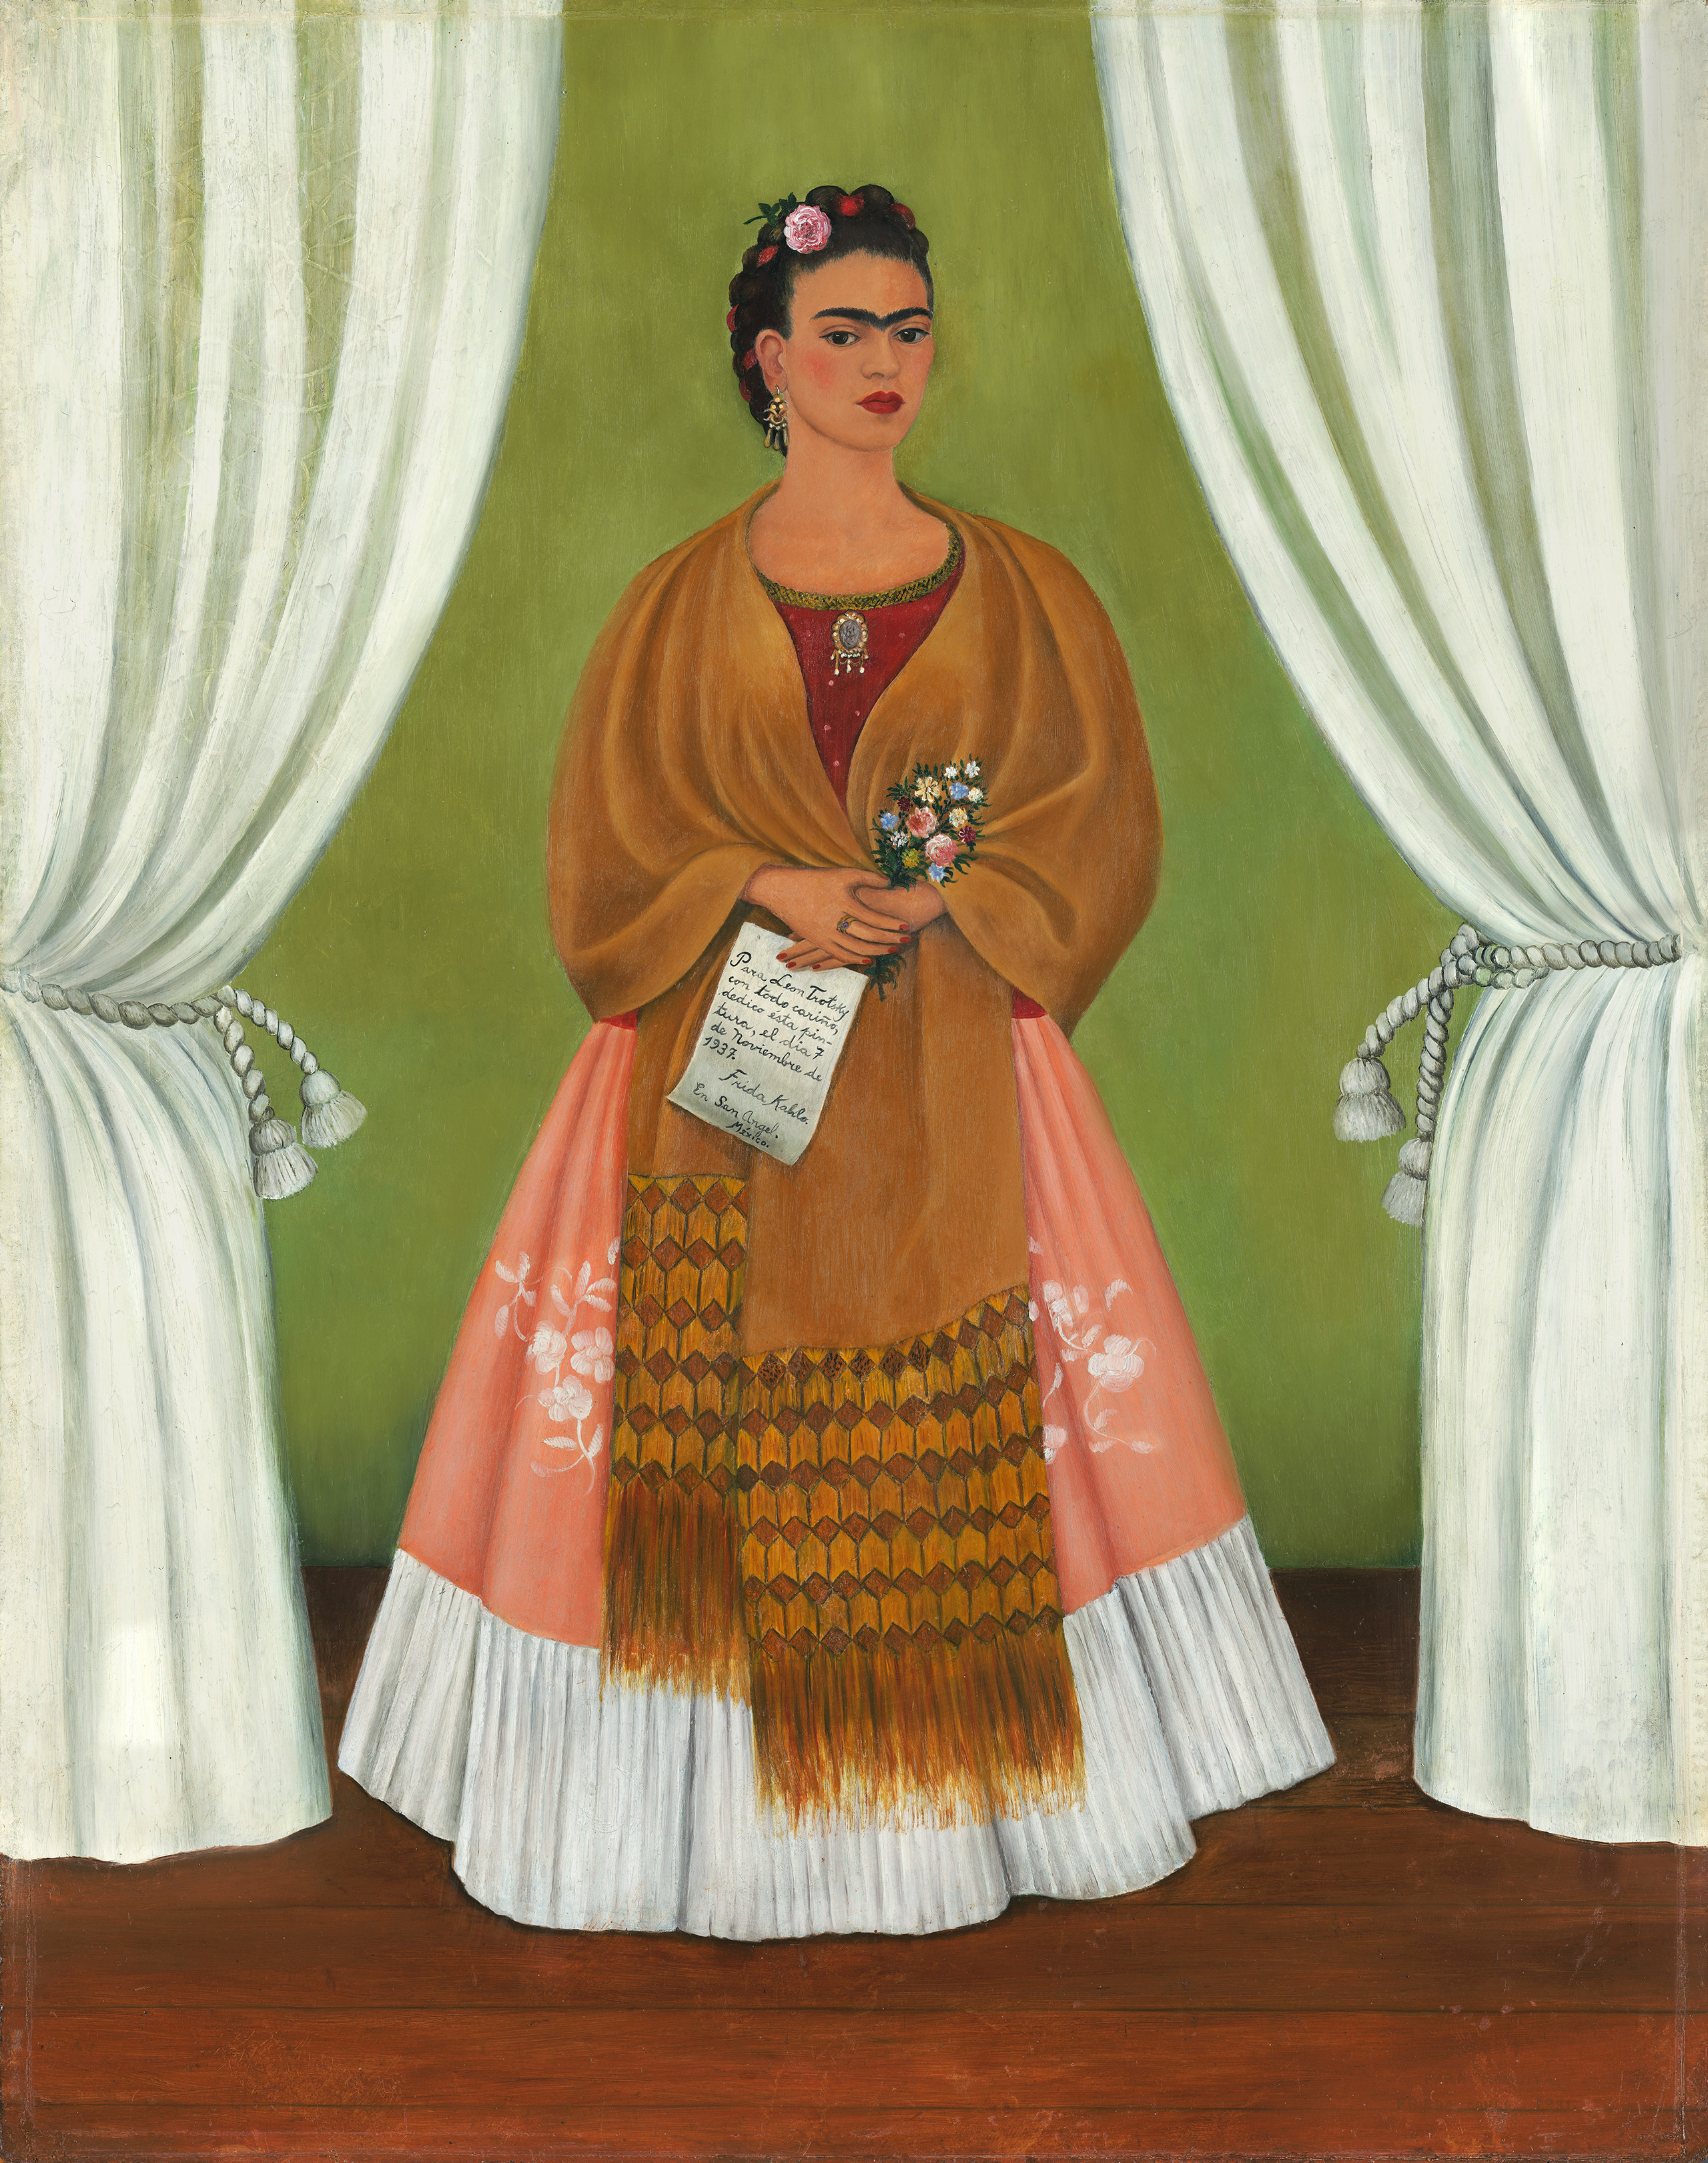 In a painted self-portrait, the artist stands in a stage-like space framed by white curtains. Beneath black hair woven with red yarn and flowers, heavy brows accent her dark-eyed gaze. Clad in a fringed, honey-toned shawl; long, pink skirt; and gold jewelry, she holds a bouquet and a handwritten letter.